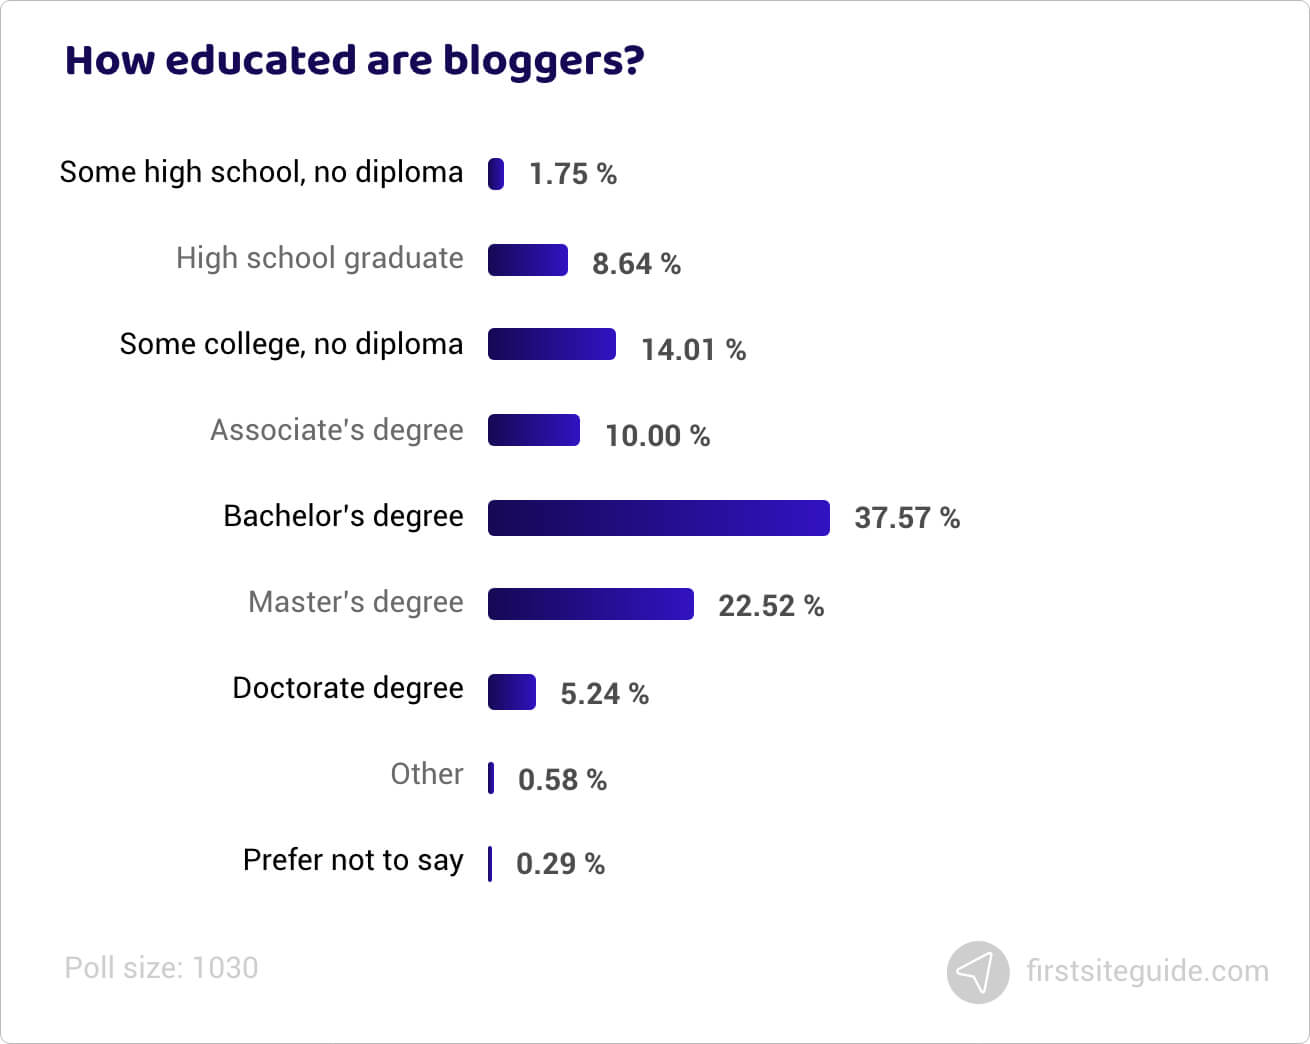 How educated are bloggers